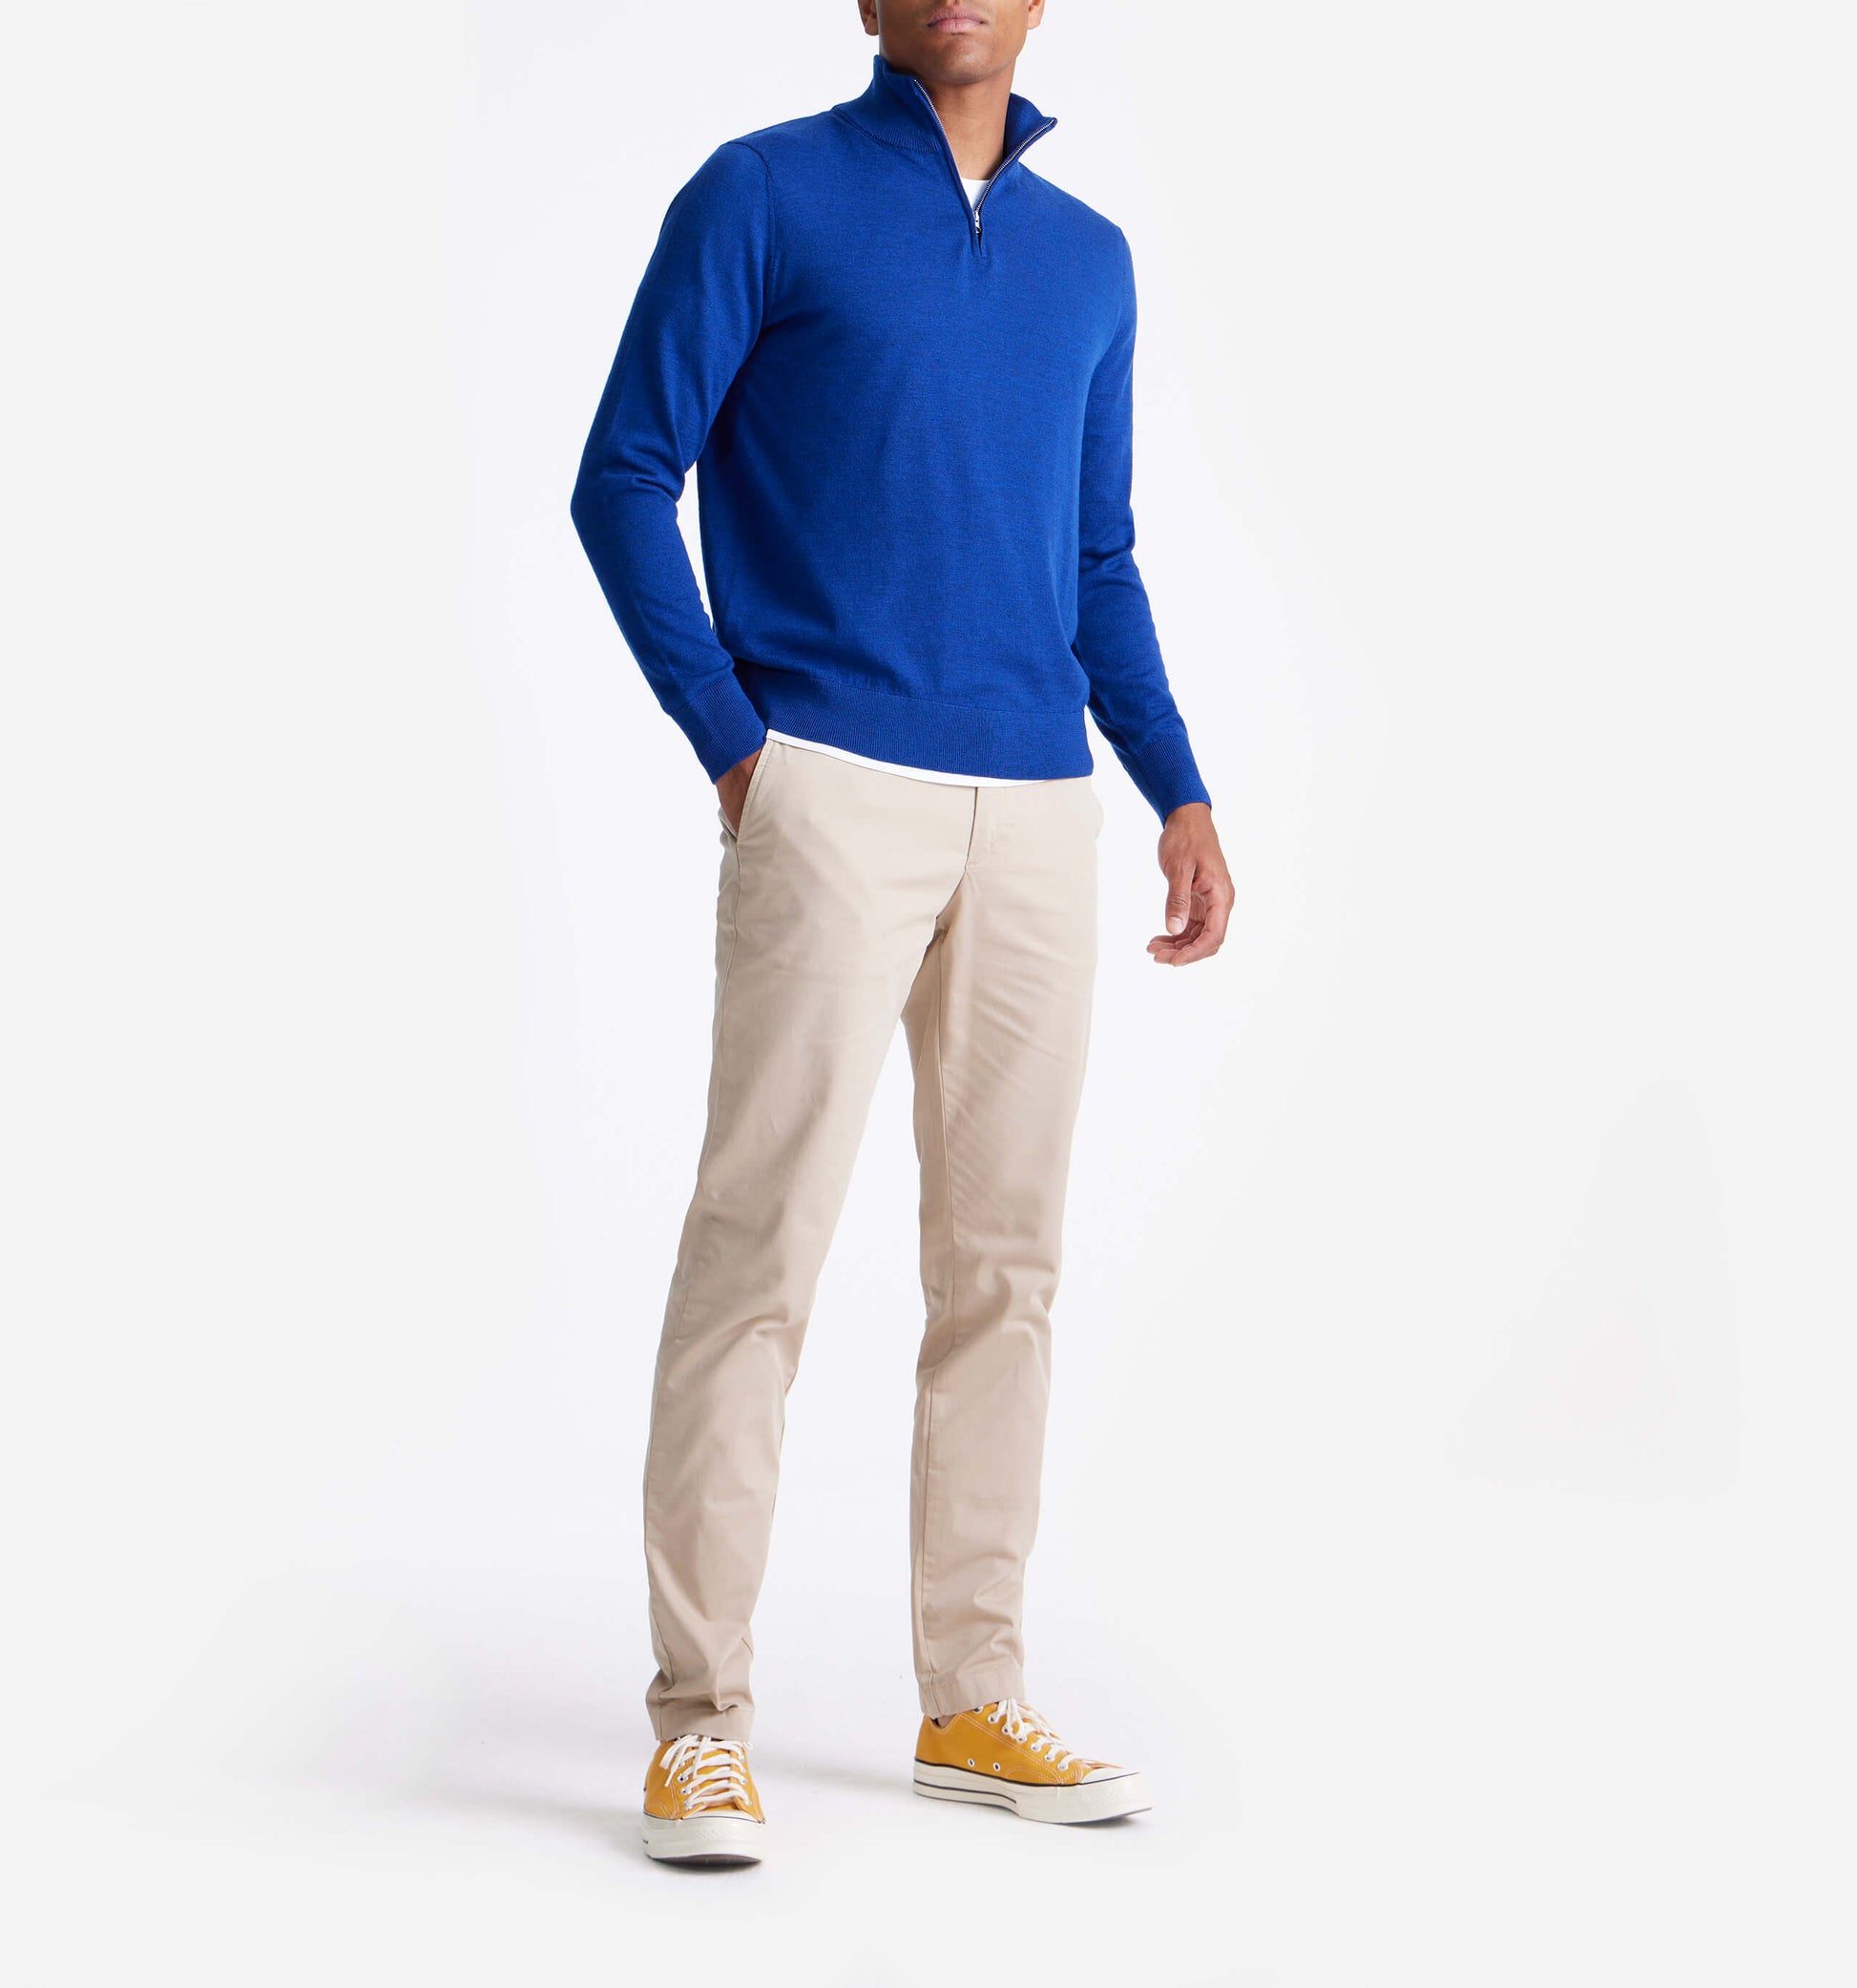 The Michael - Merino Wool Zip Mock In Royal Blue From King Essentials